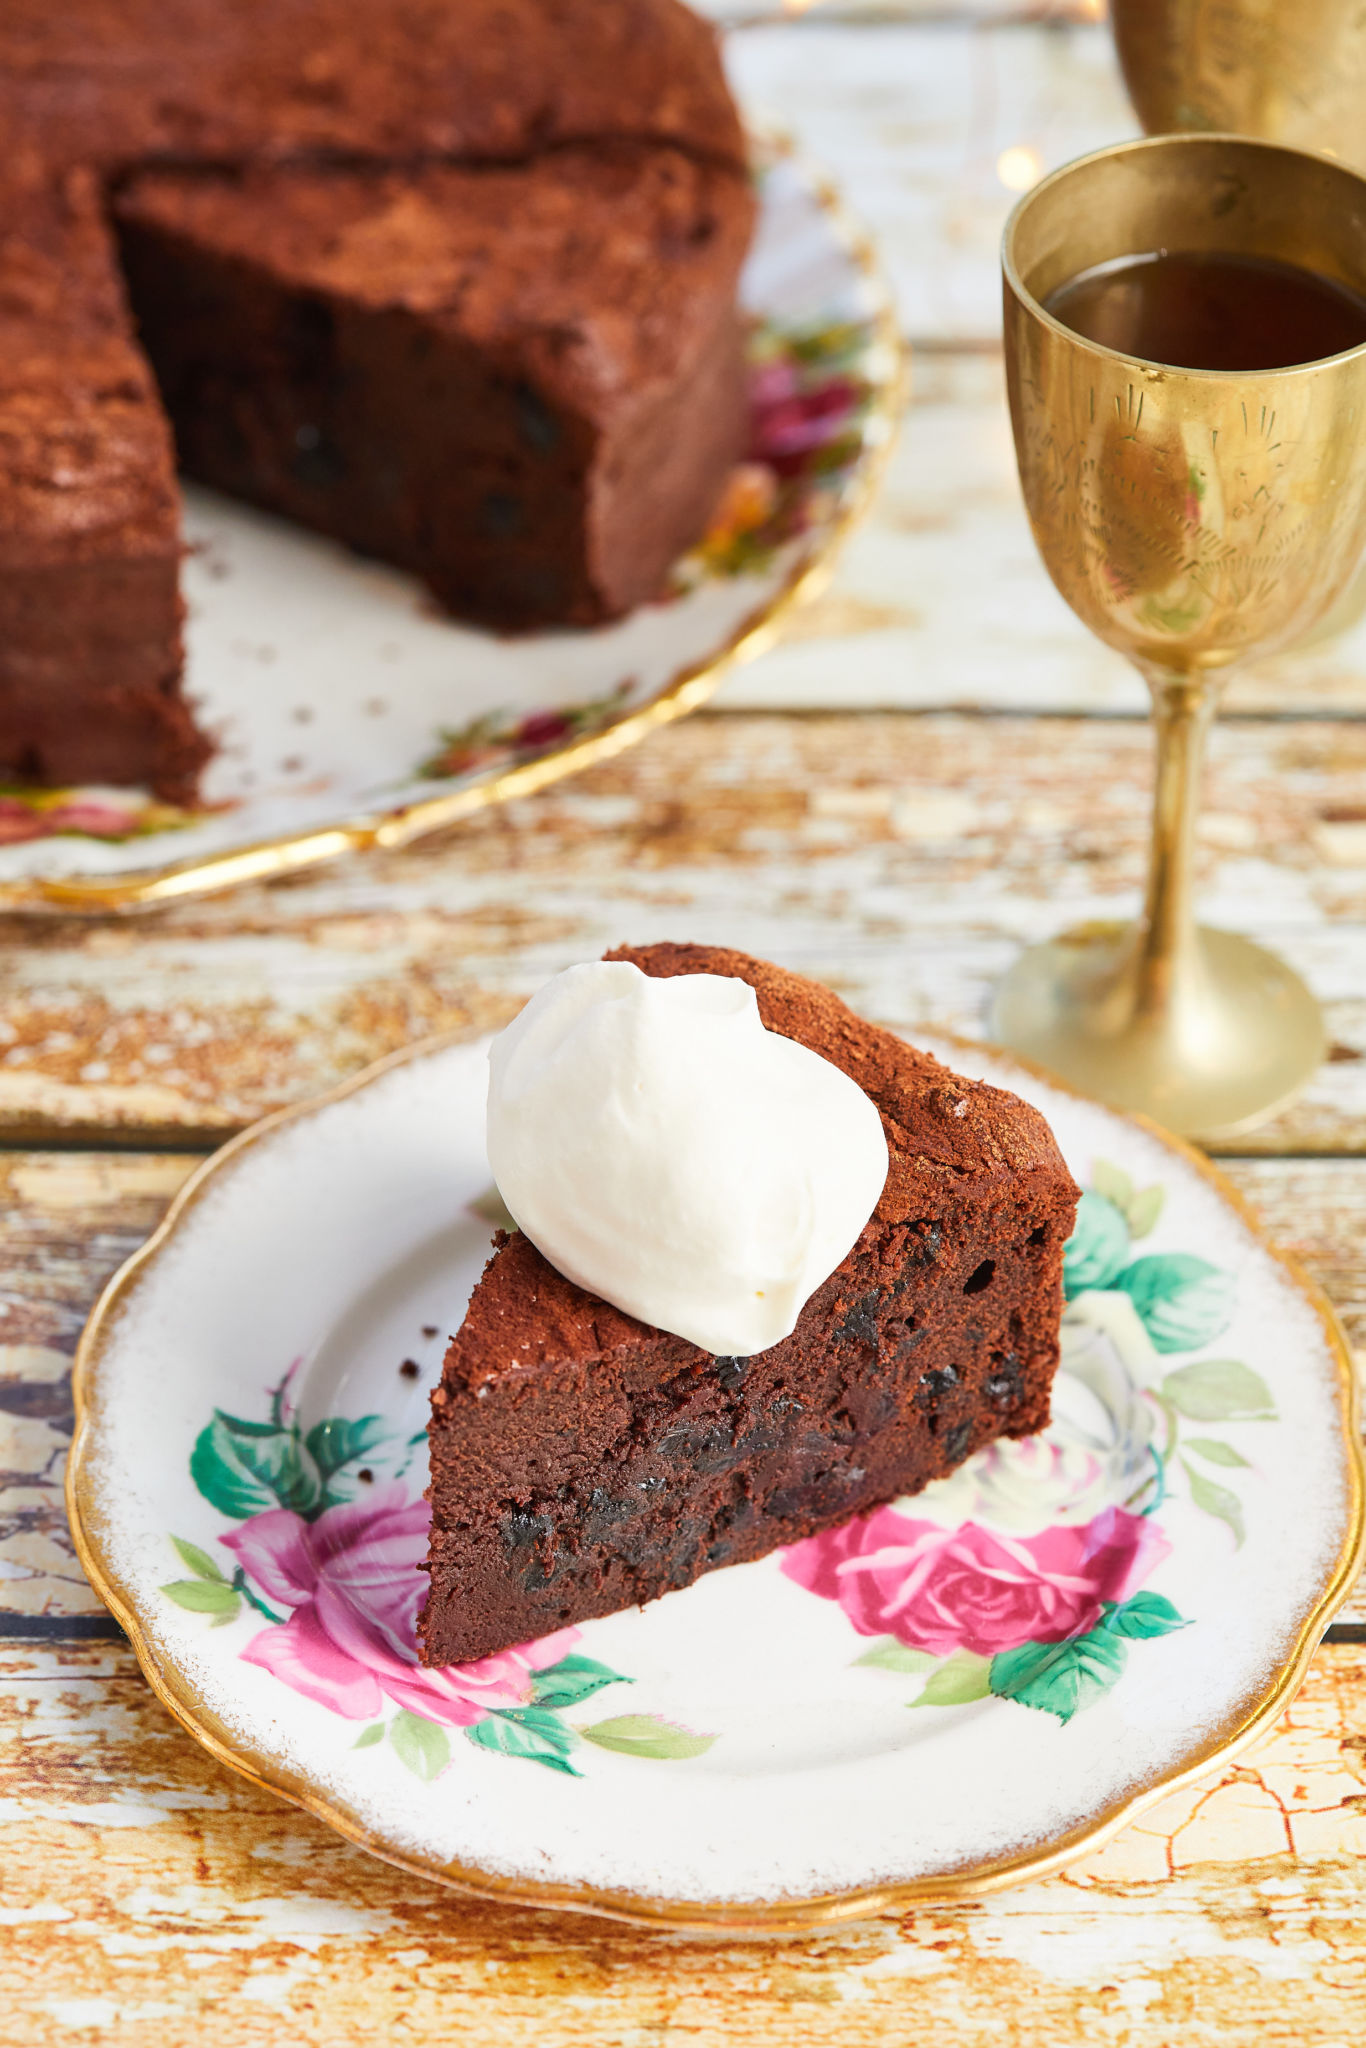 A dollop of whipped cream on top of a slice of Warm Chocolate Cake with Rum-Soaked Prunes.